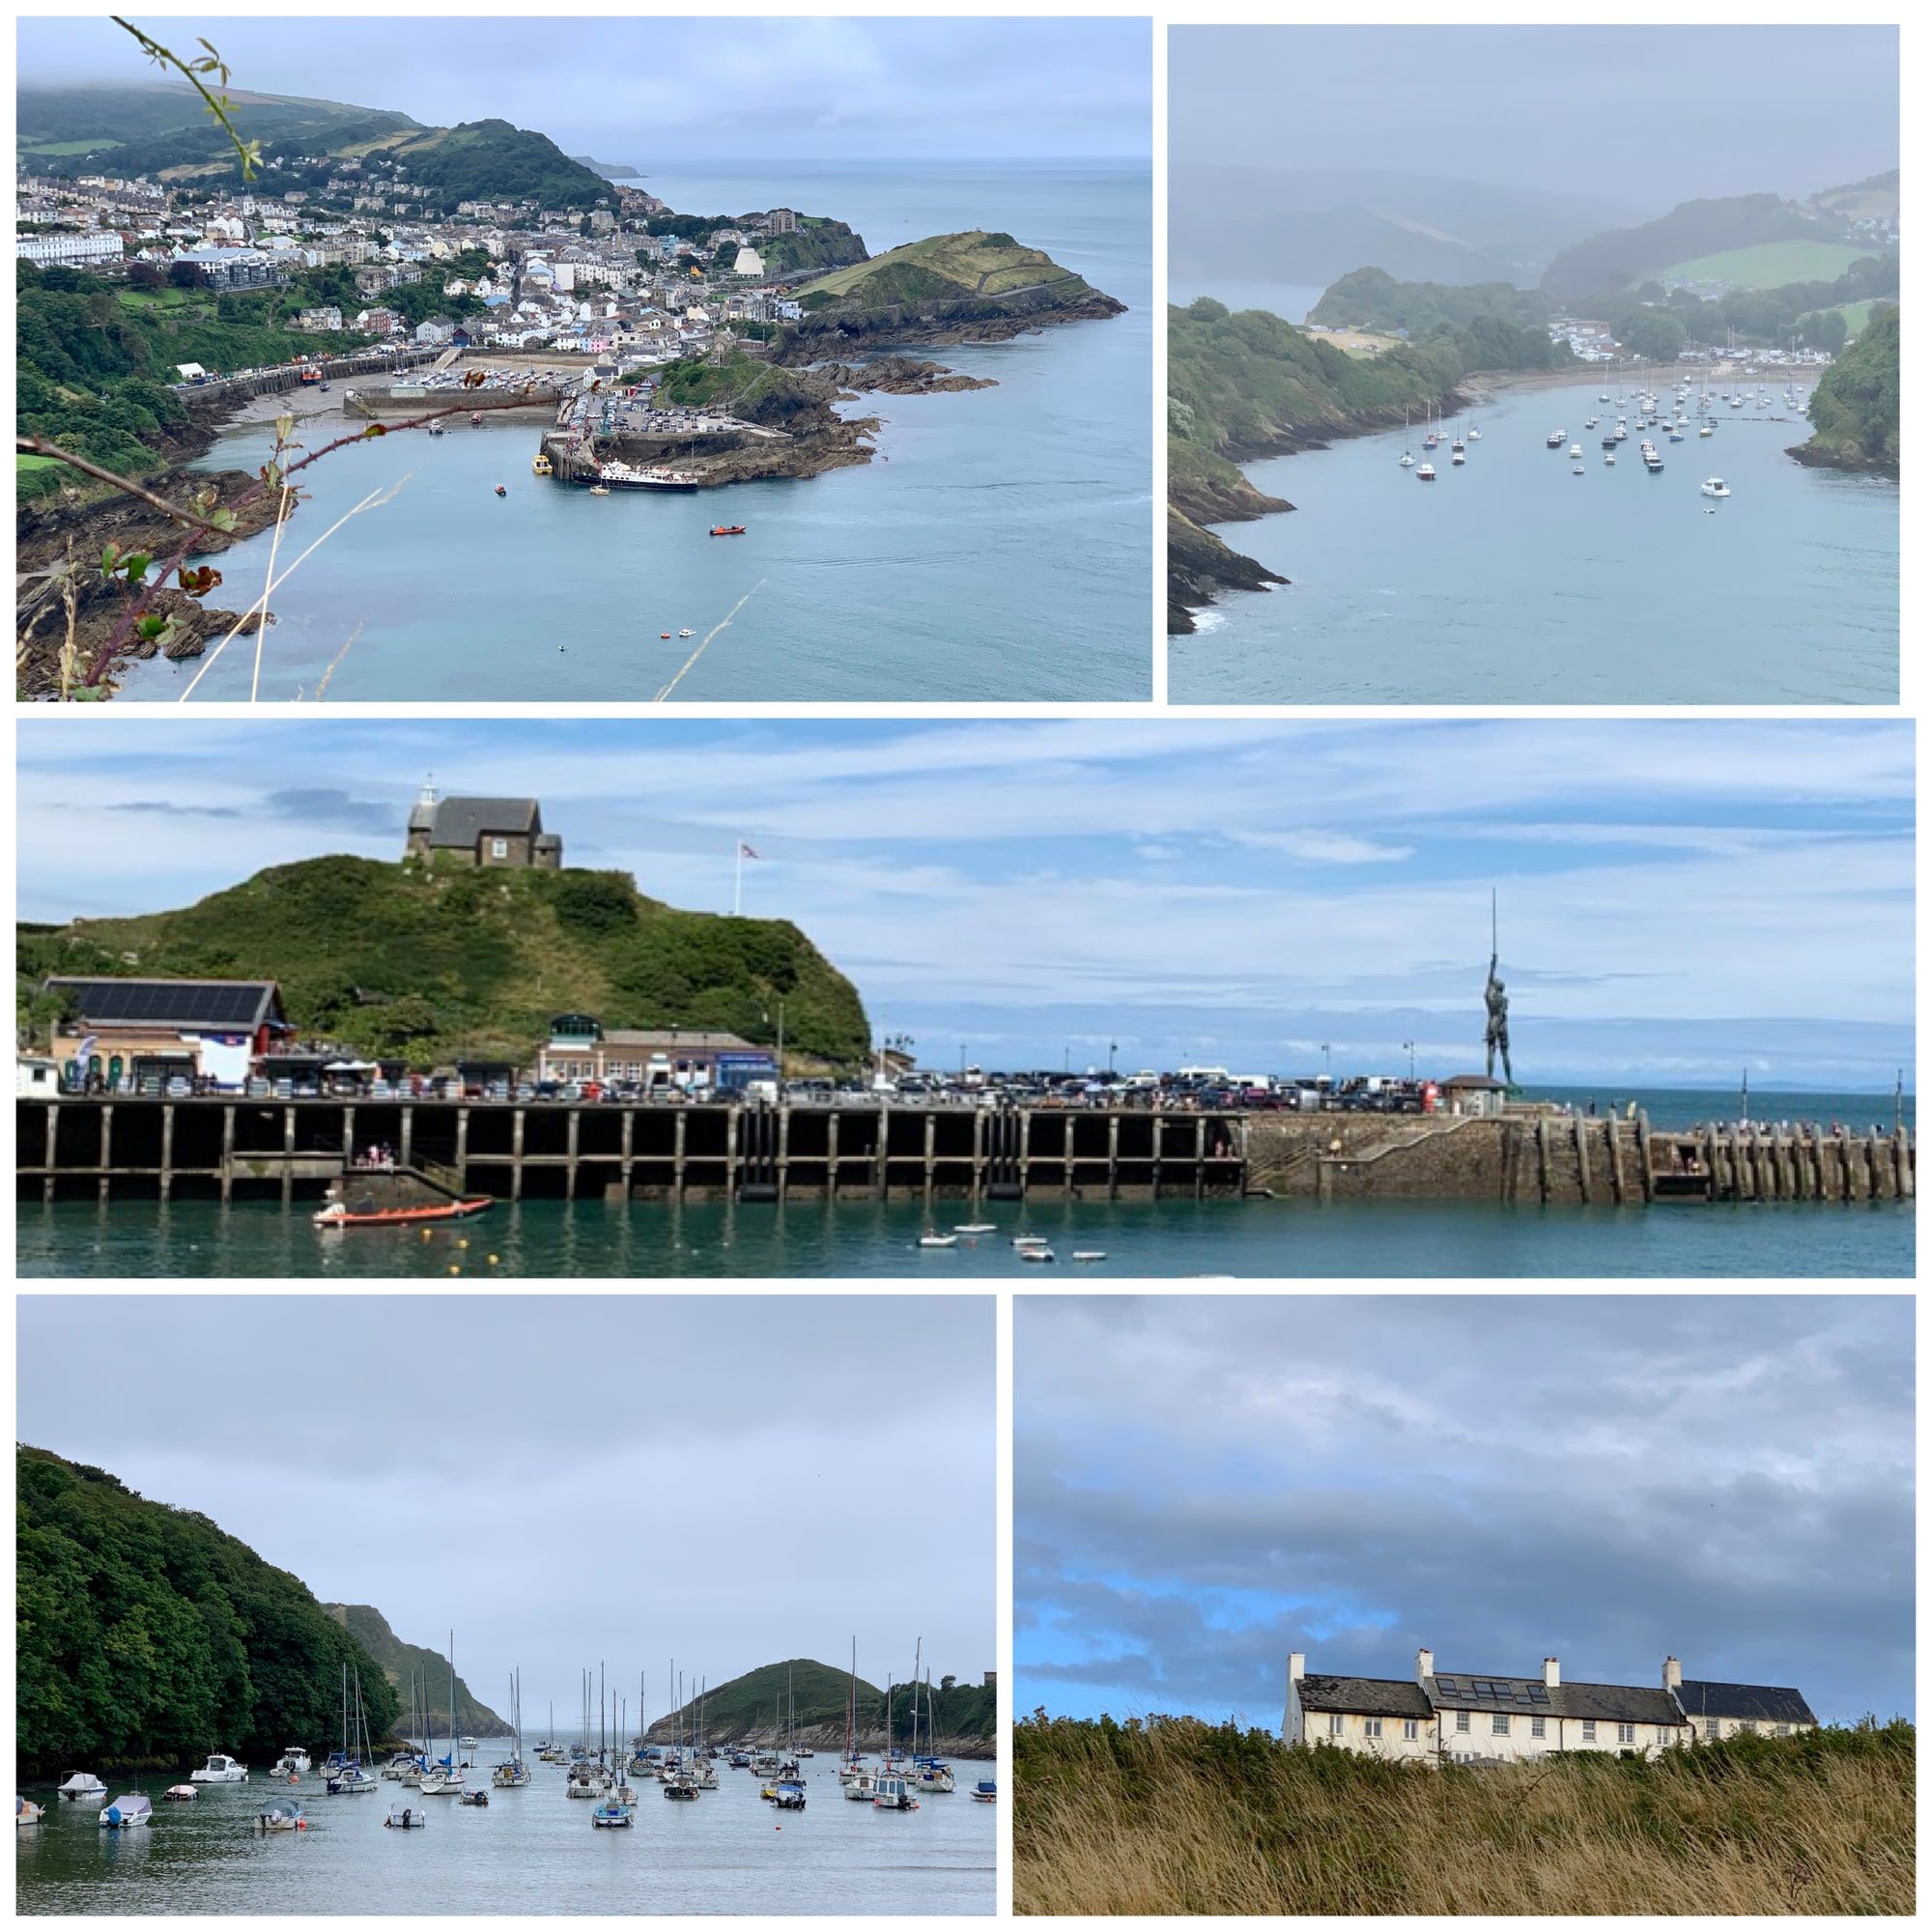 Views of Watermouth and Ilfracombe from the Southwest Coast Path